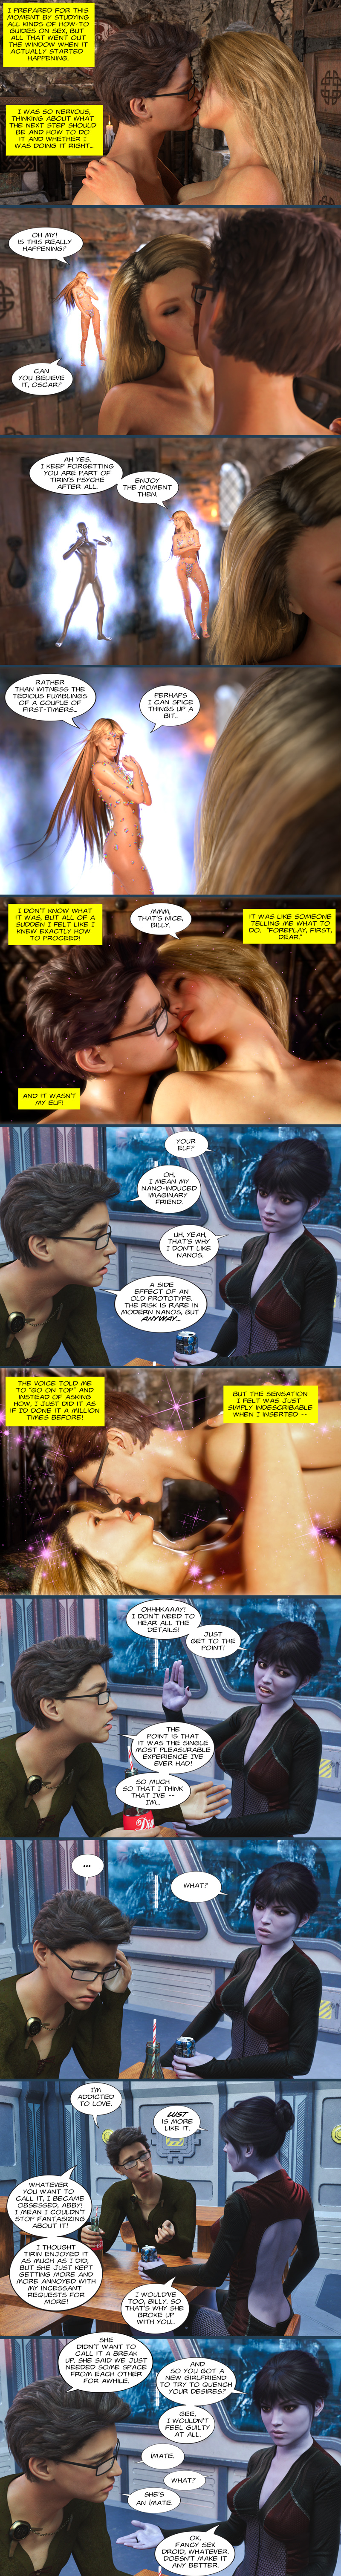 Chapter 20, page 5 – addicted to love… or is it lust?